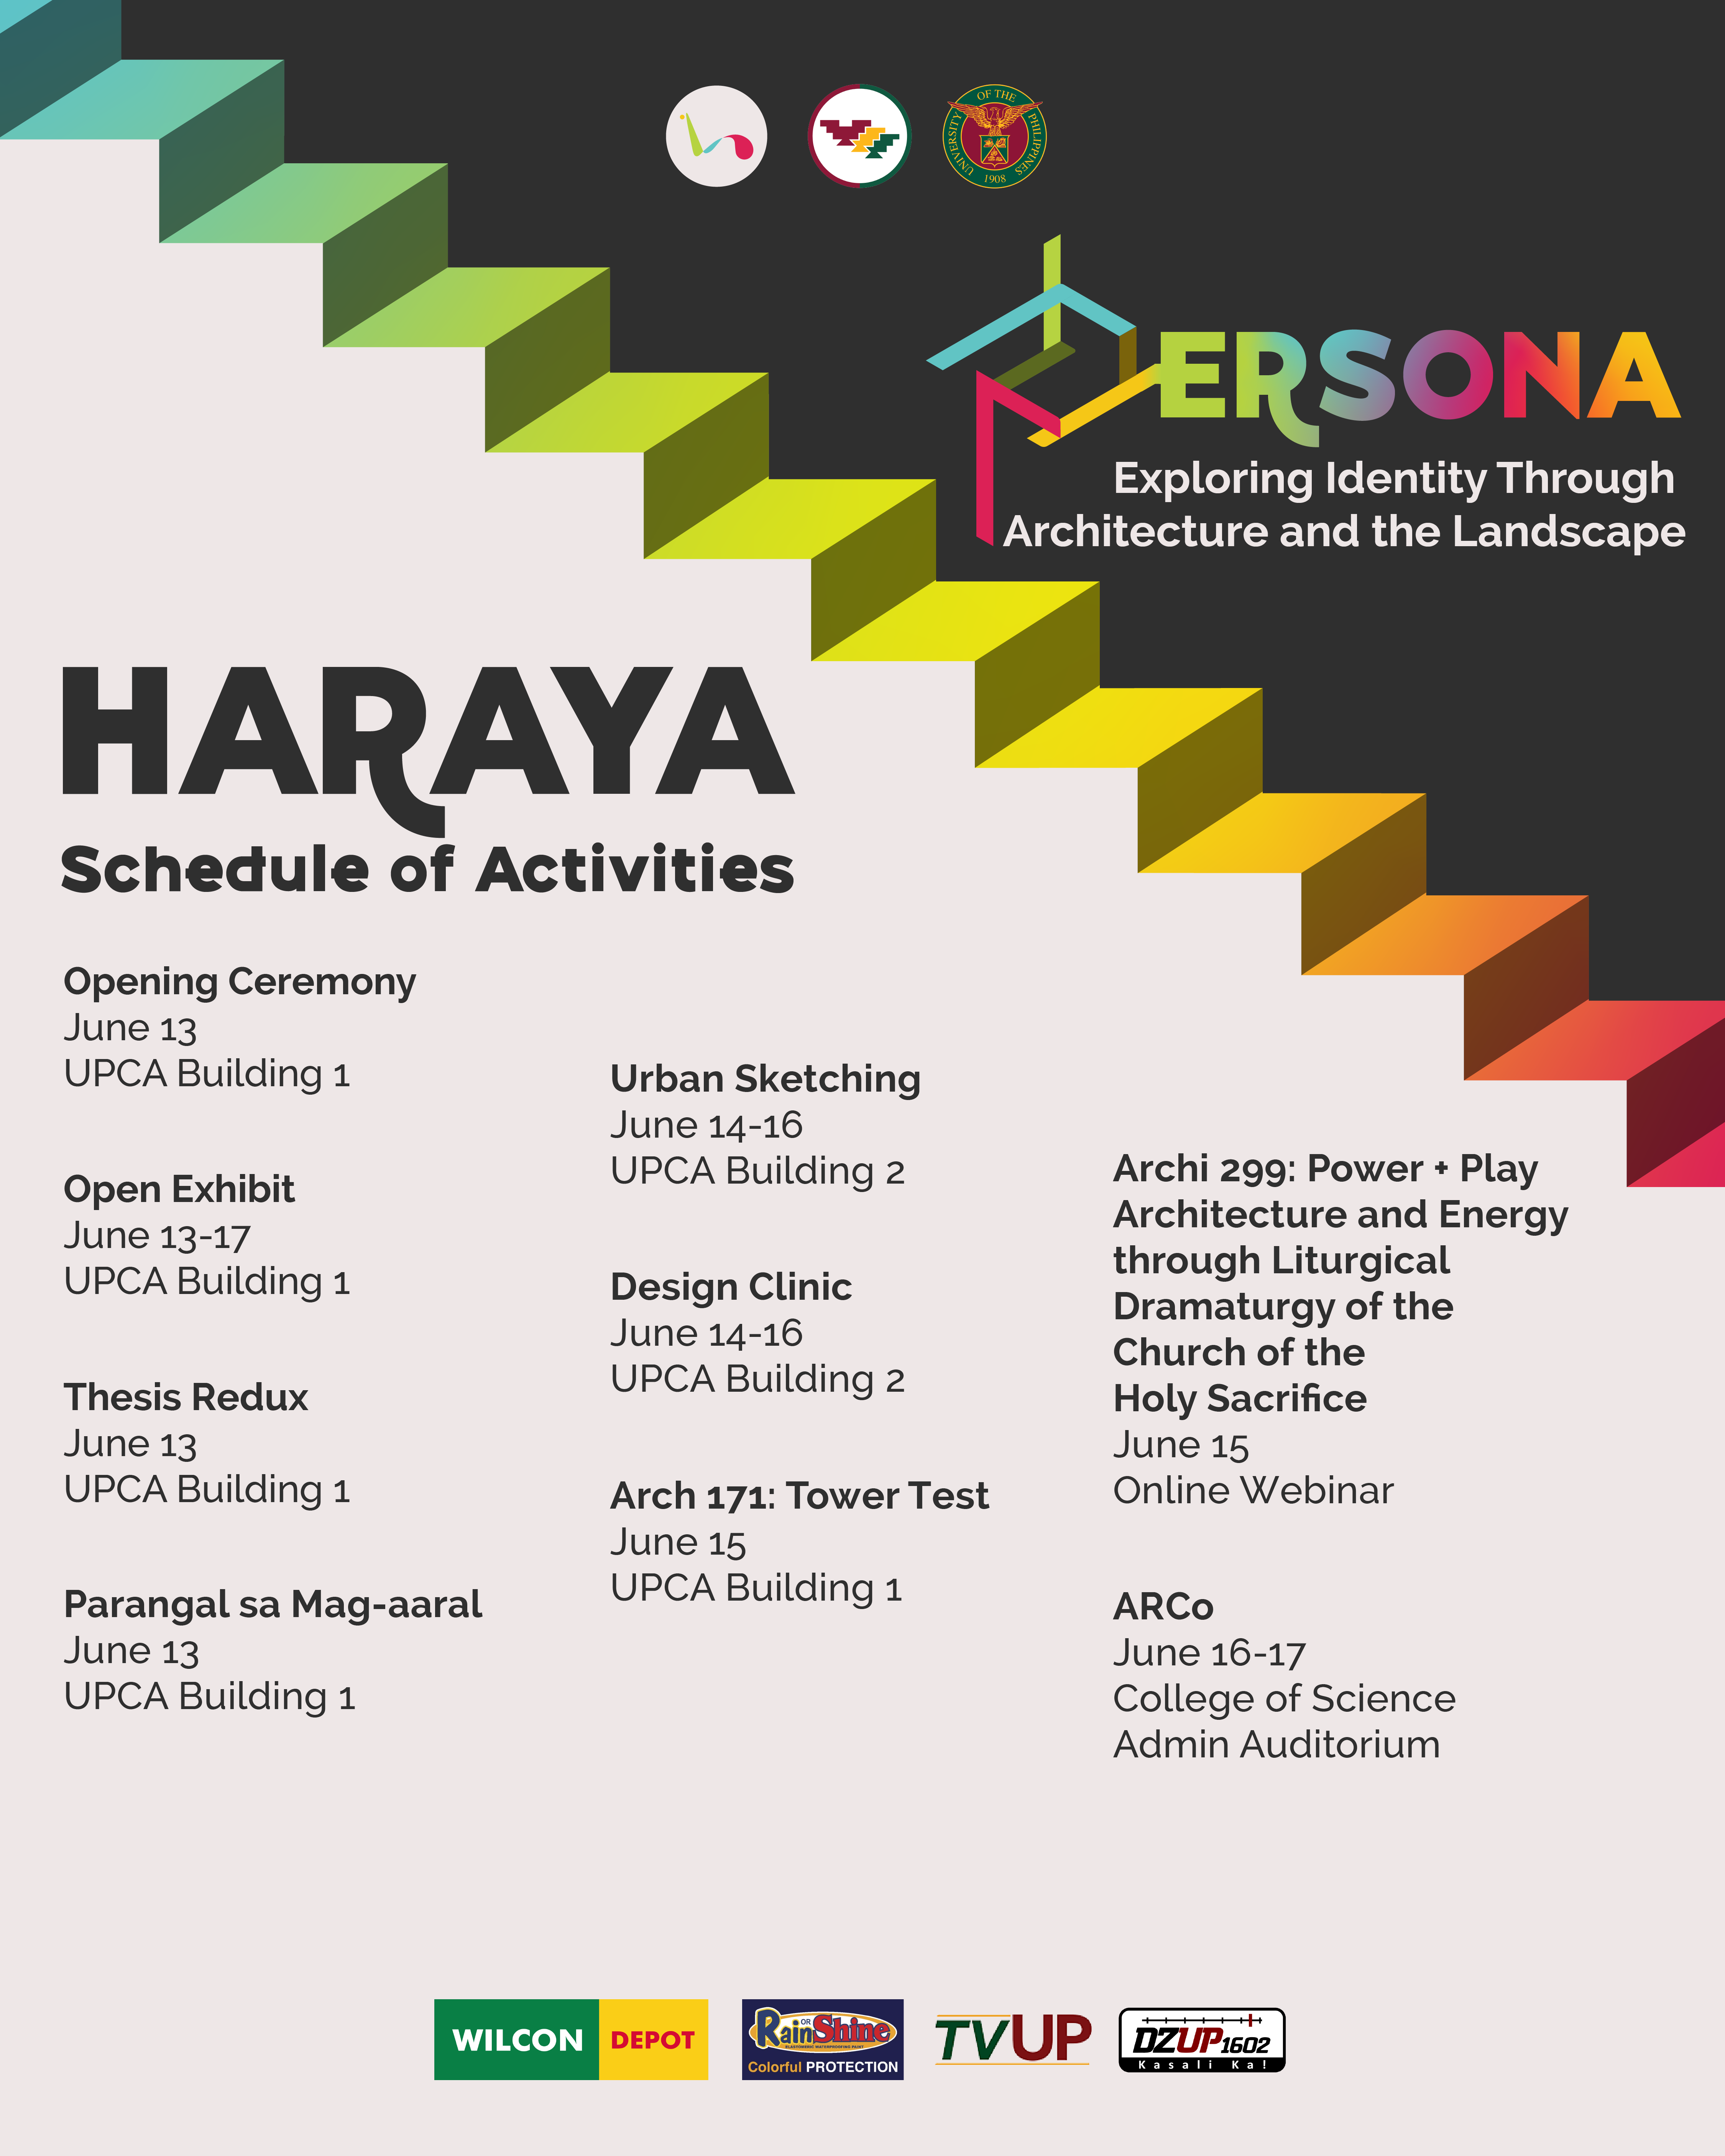 HARAYA: Persona - Exploring Identity Through Architecture and the Landscape